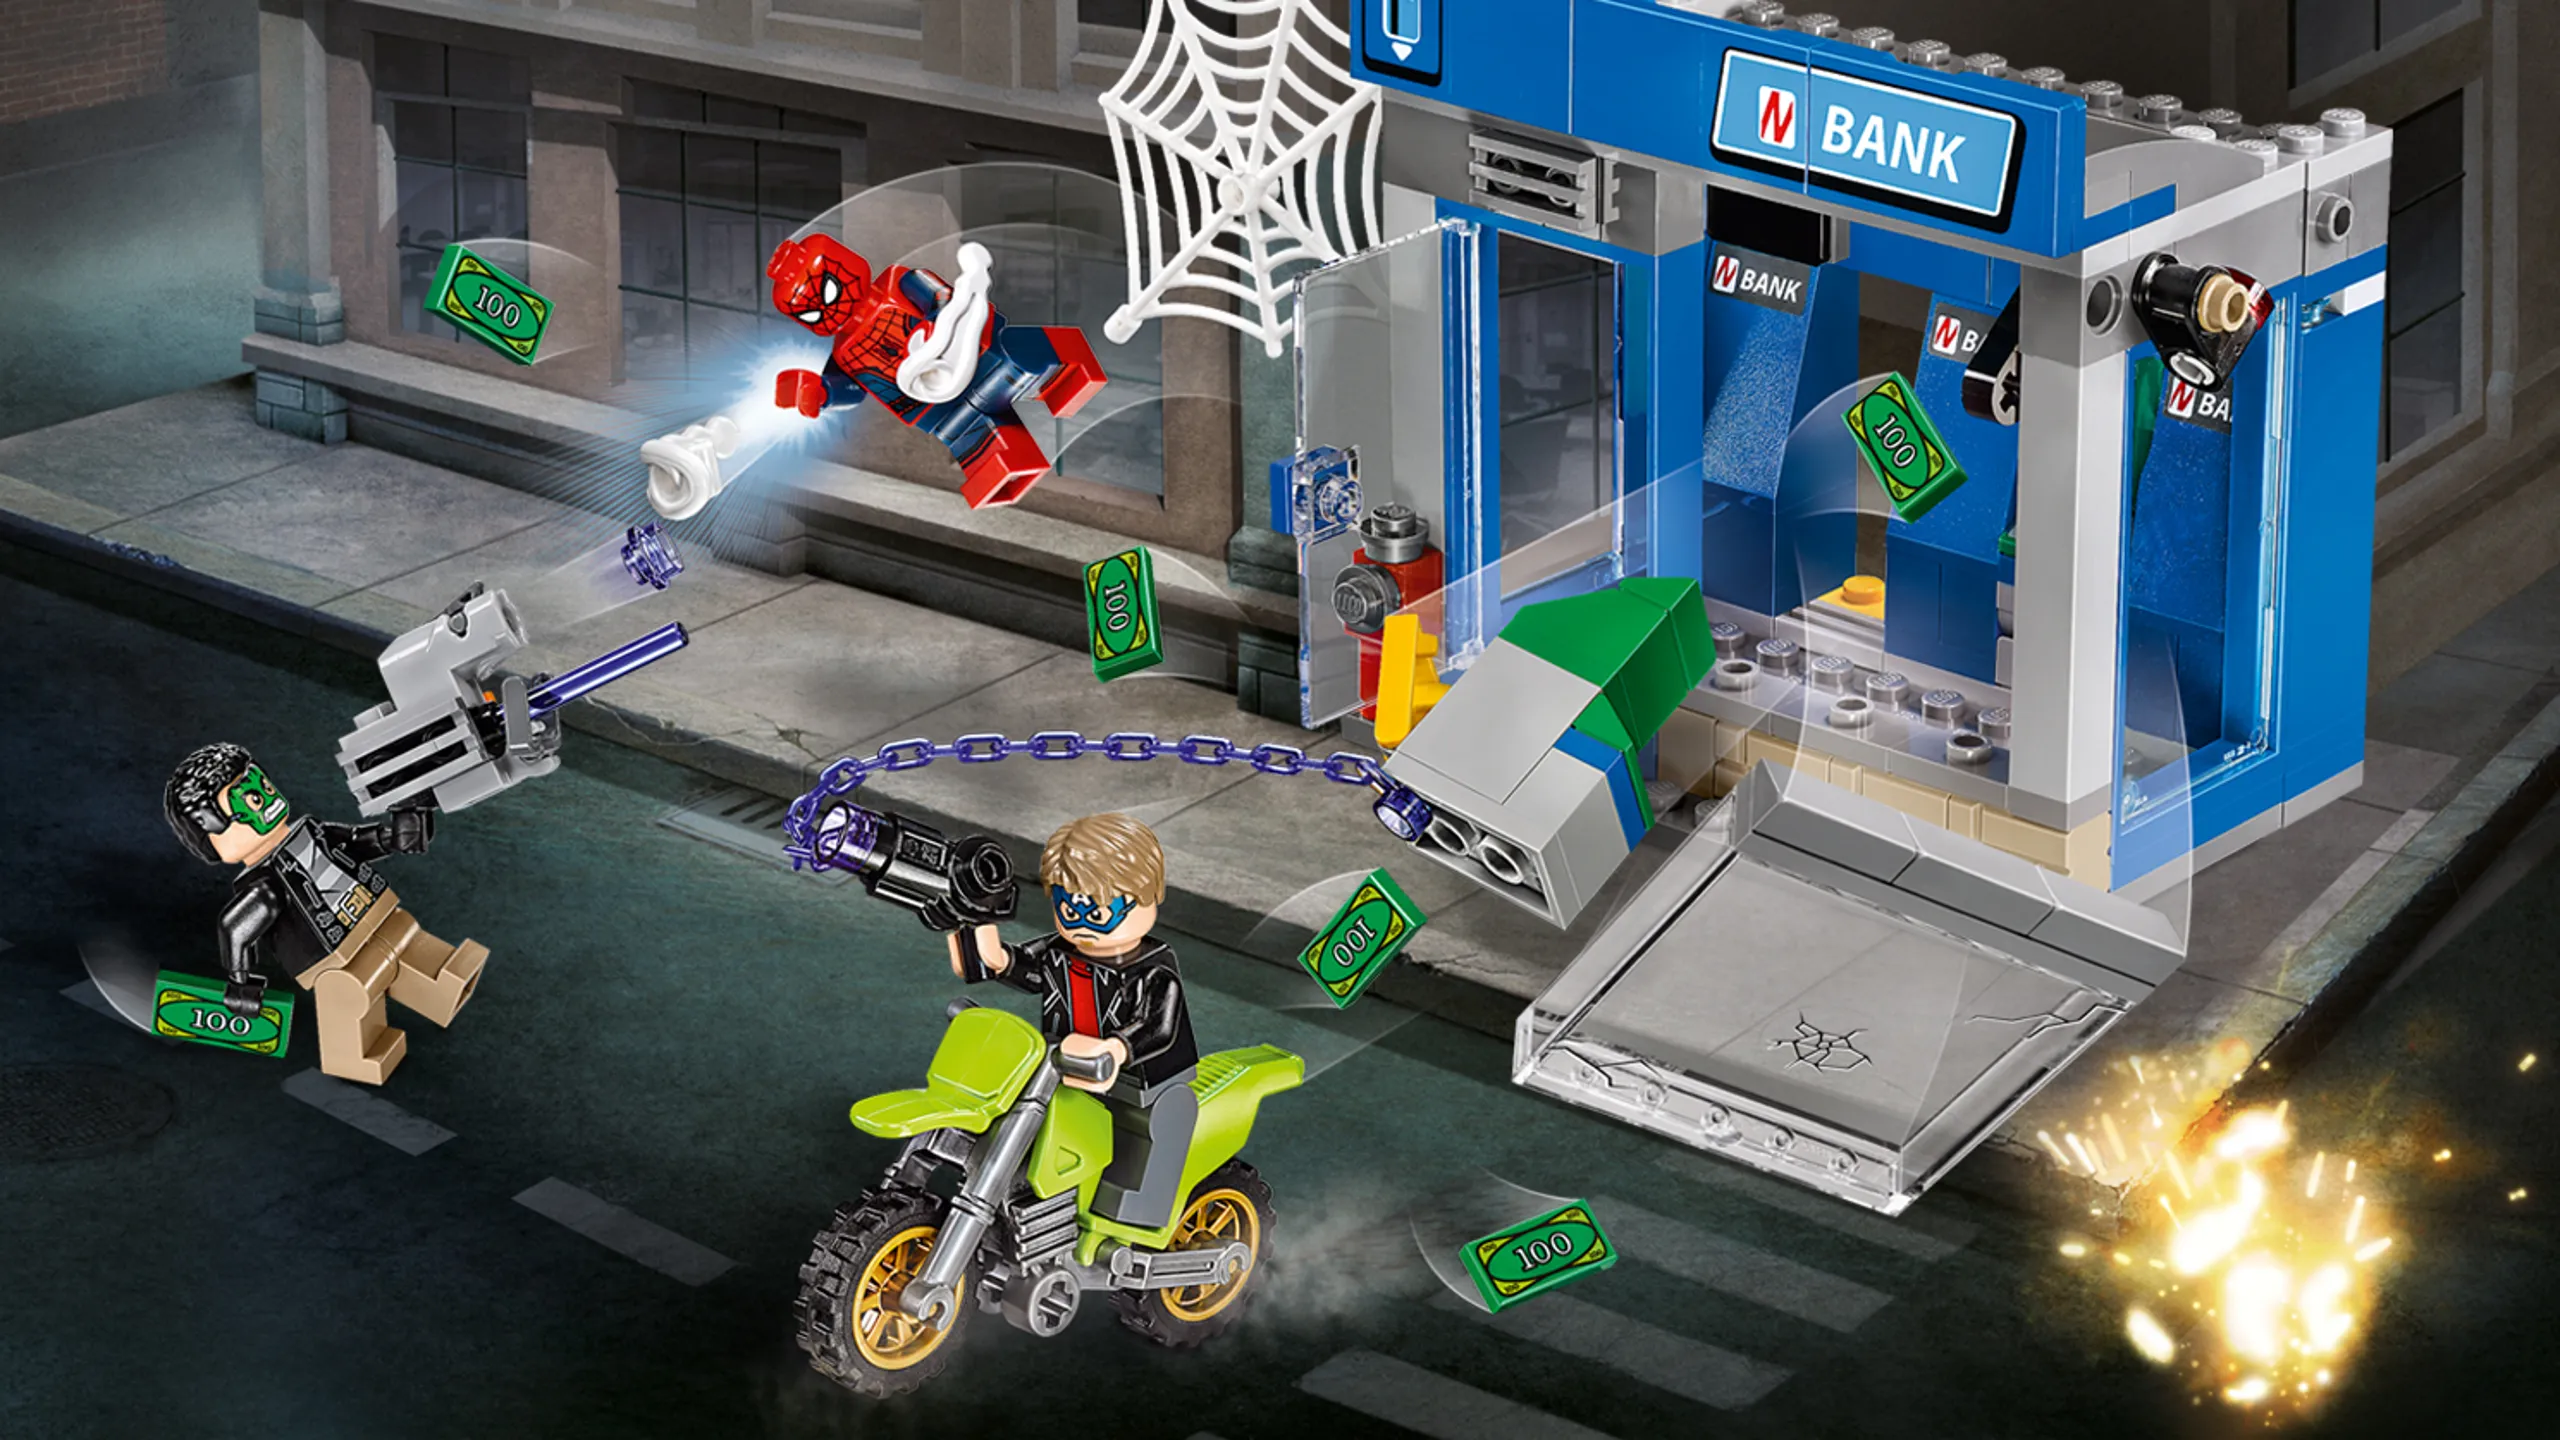 LEGO Super Heroes - 76082 ATM Heist Battle - Masked robbers steal an ATM from the bank with a special chain and motorcycle so Spider-Man fires power studs to catch the robbers.